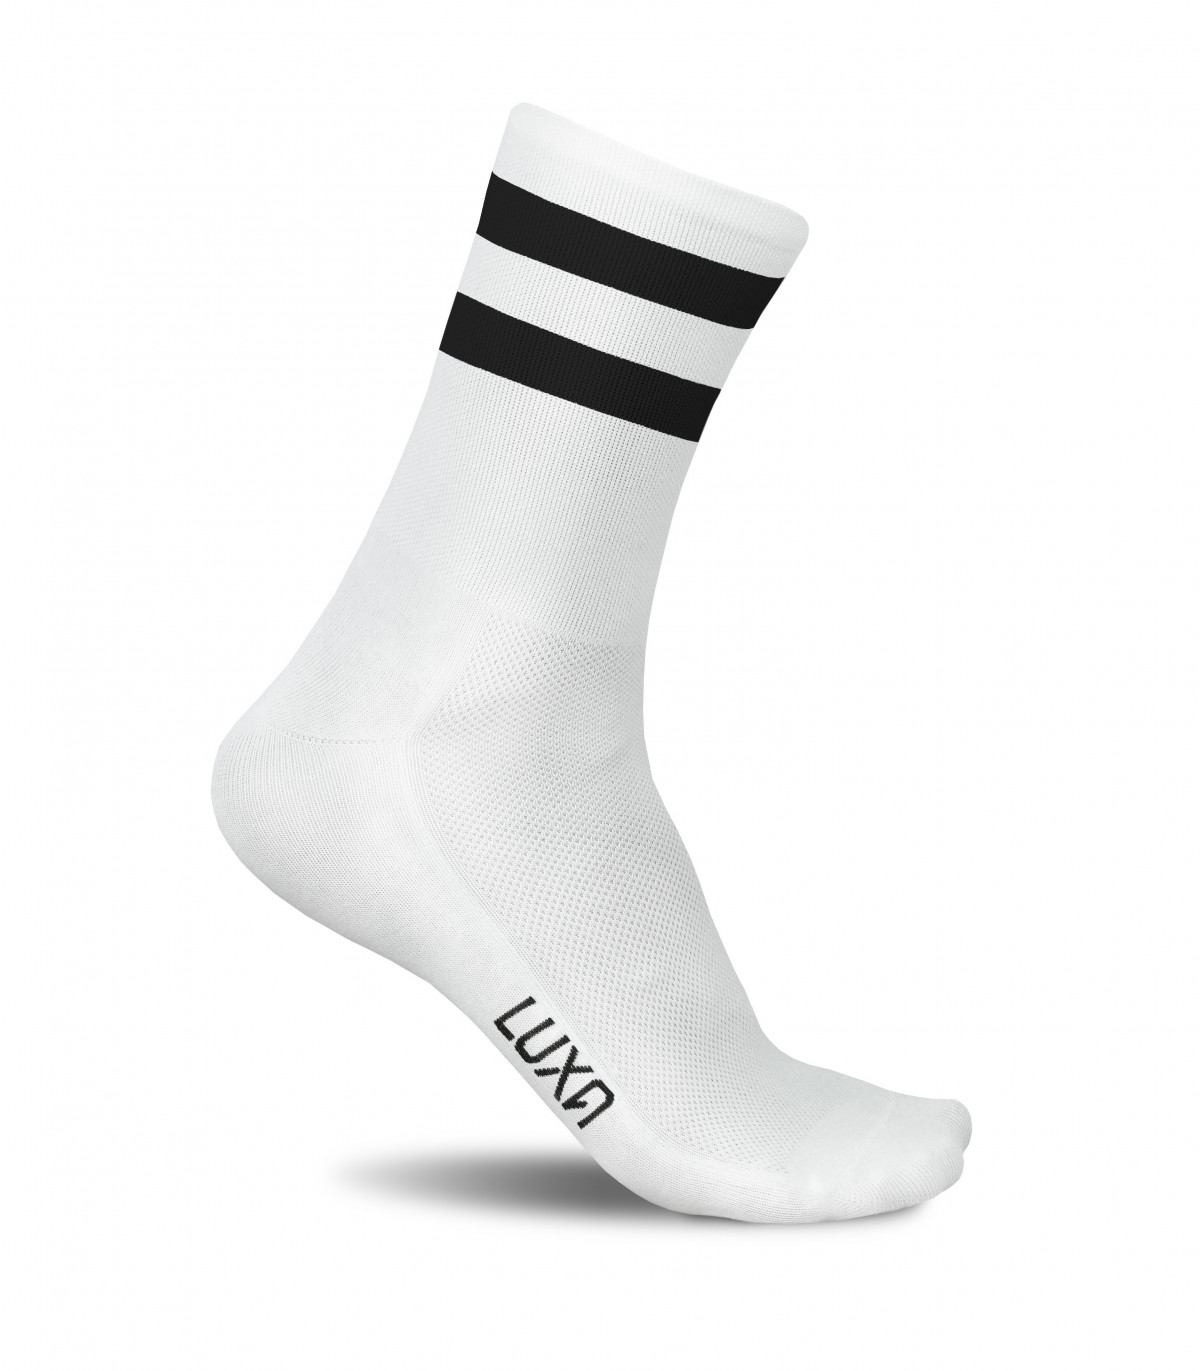 Socks Designed to Road Cycling. White Color with Stripes. Made in EU